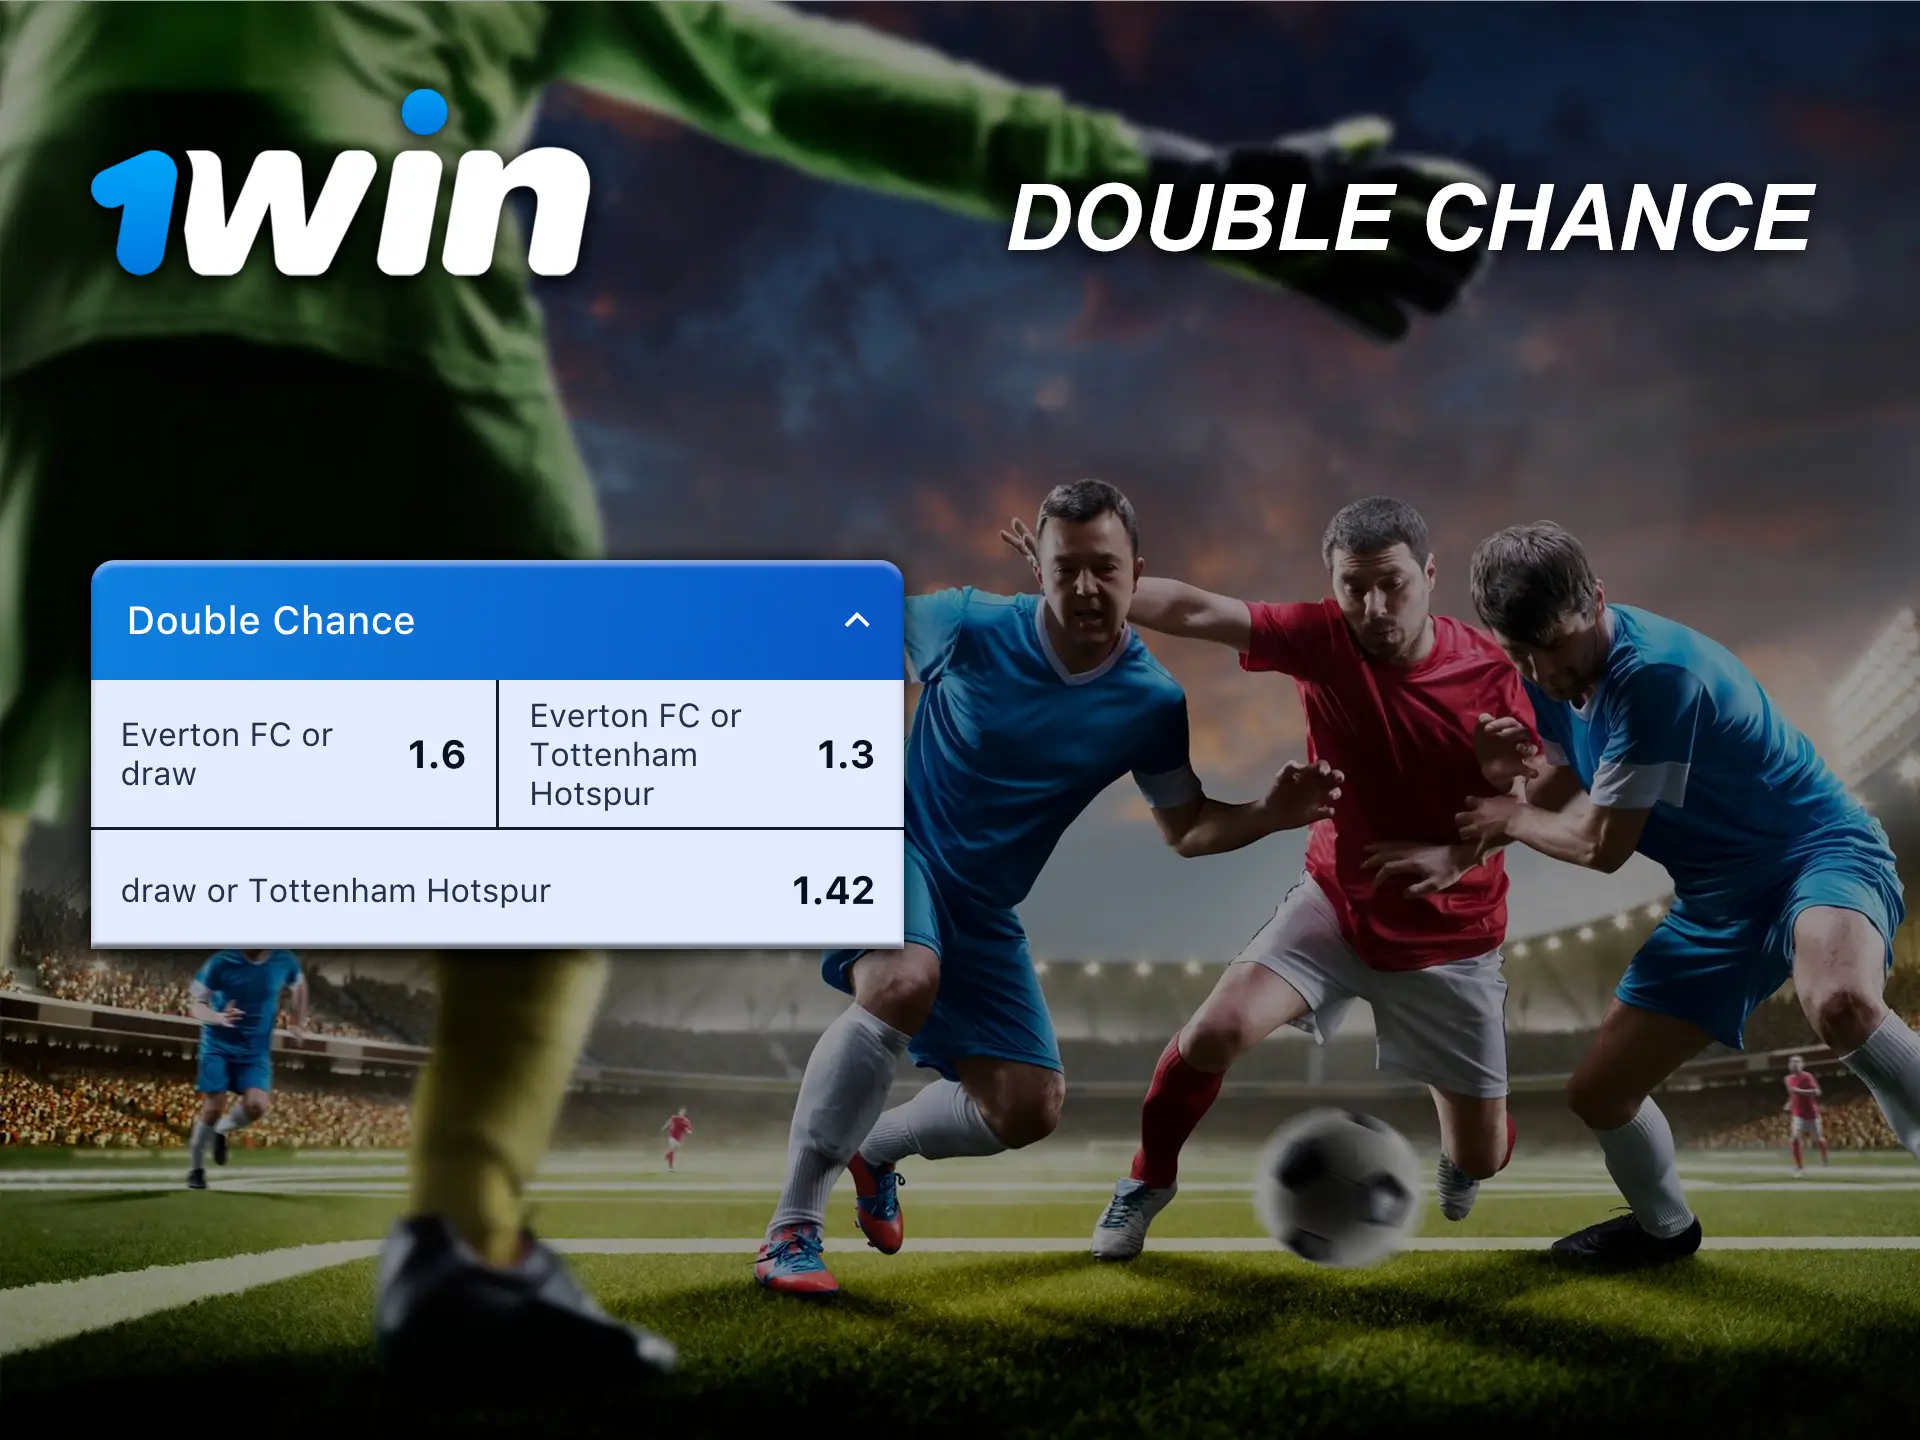 Double Chance at 1Win is in good demand as your chances of winning are very high.